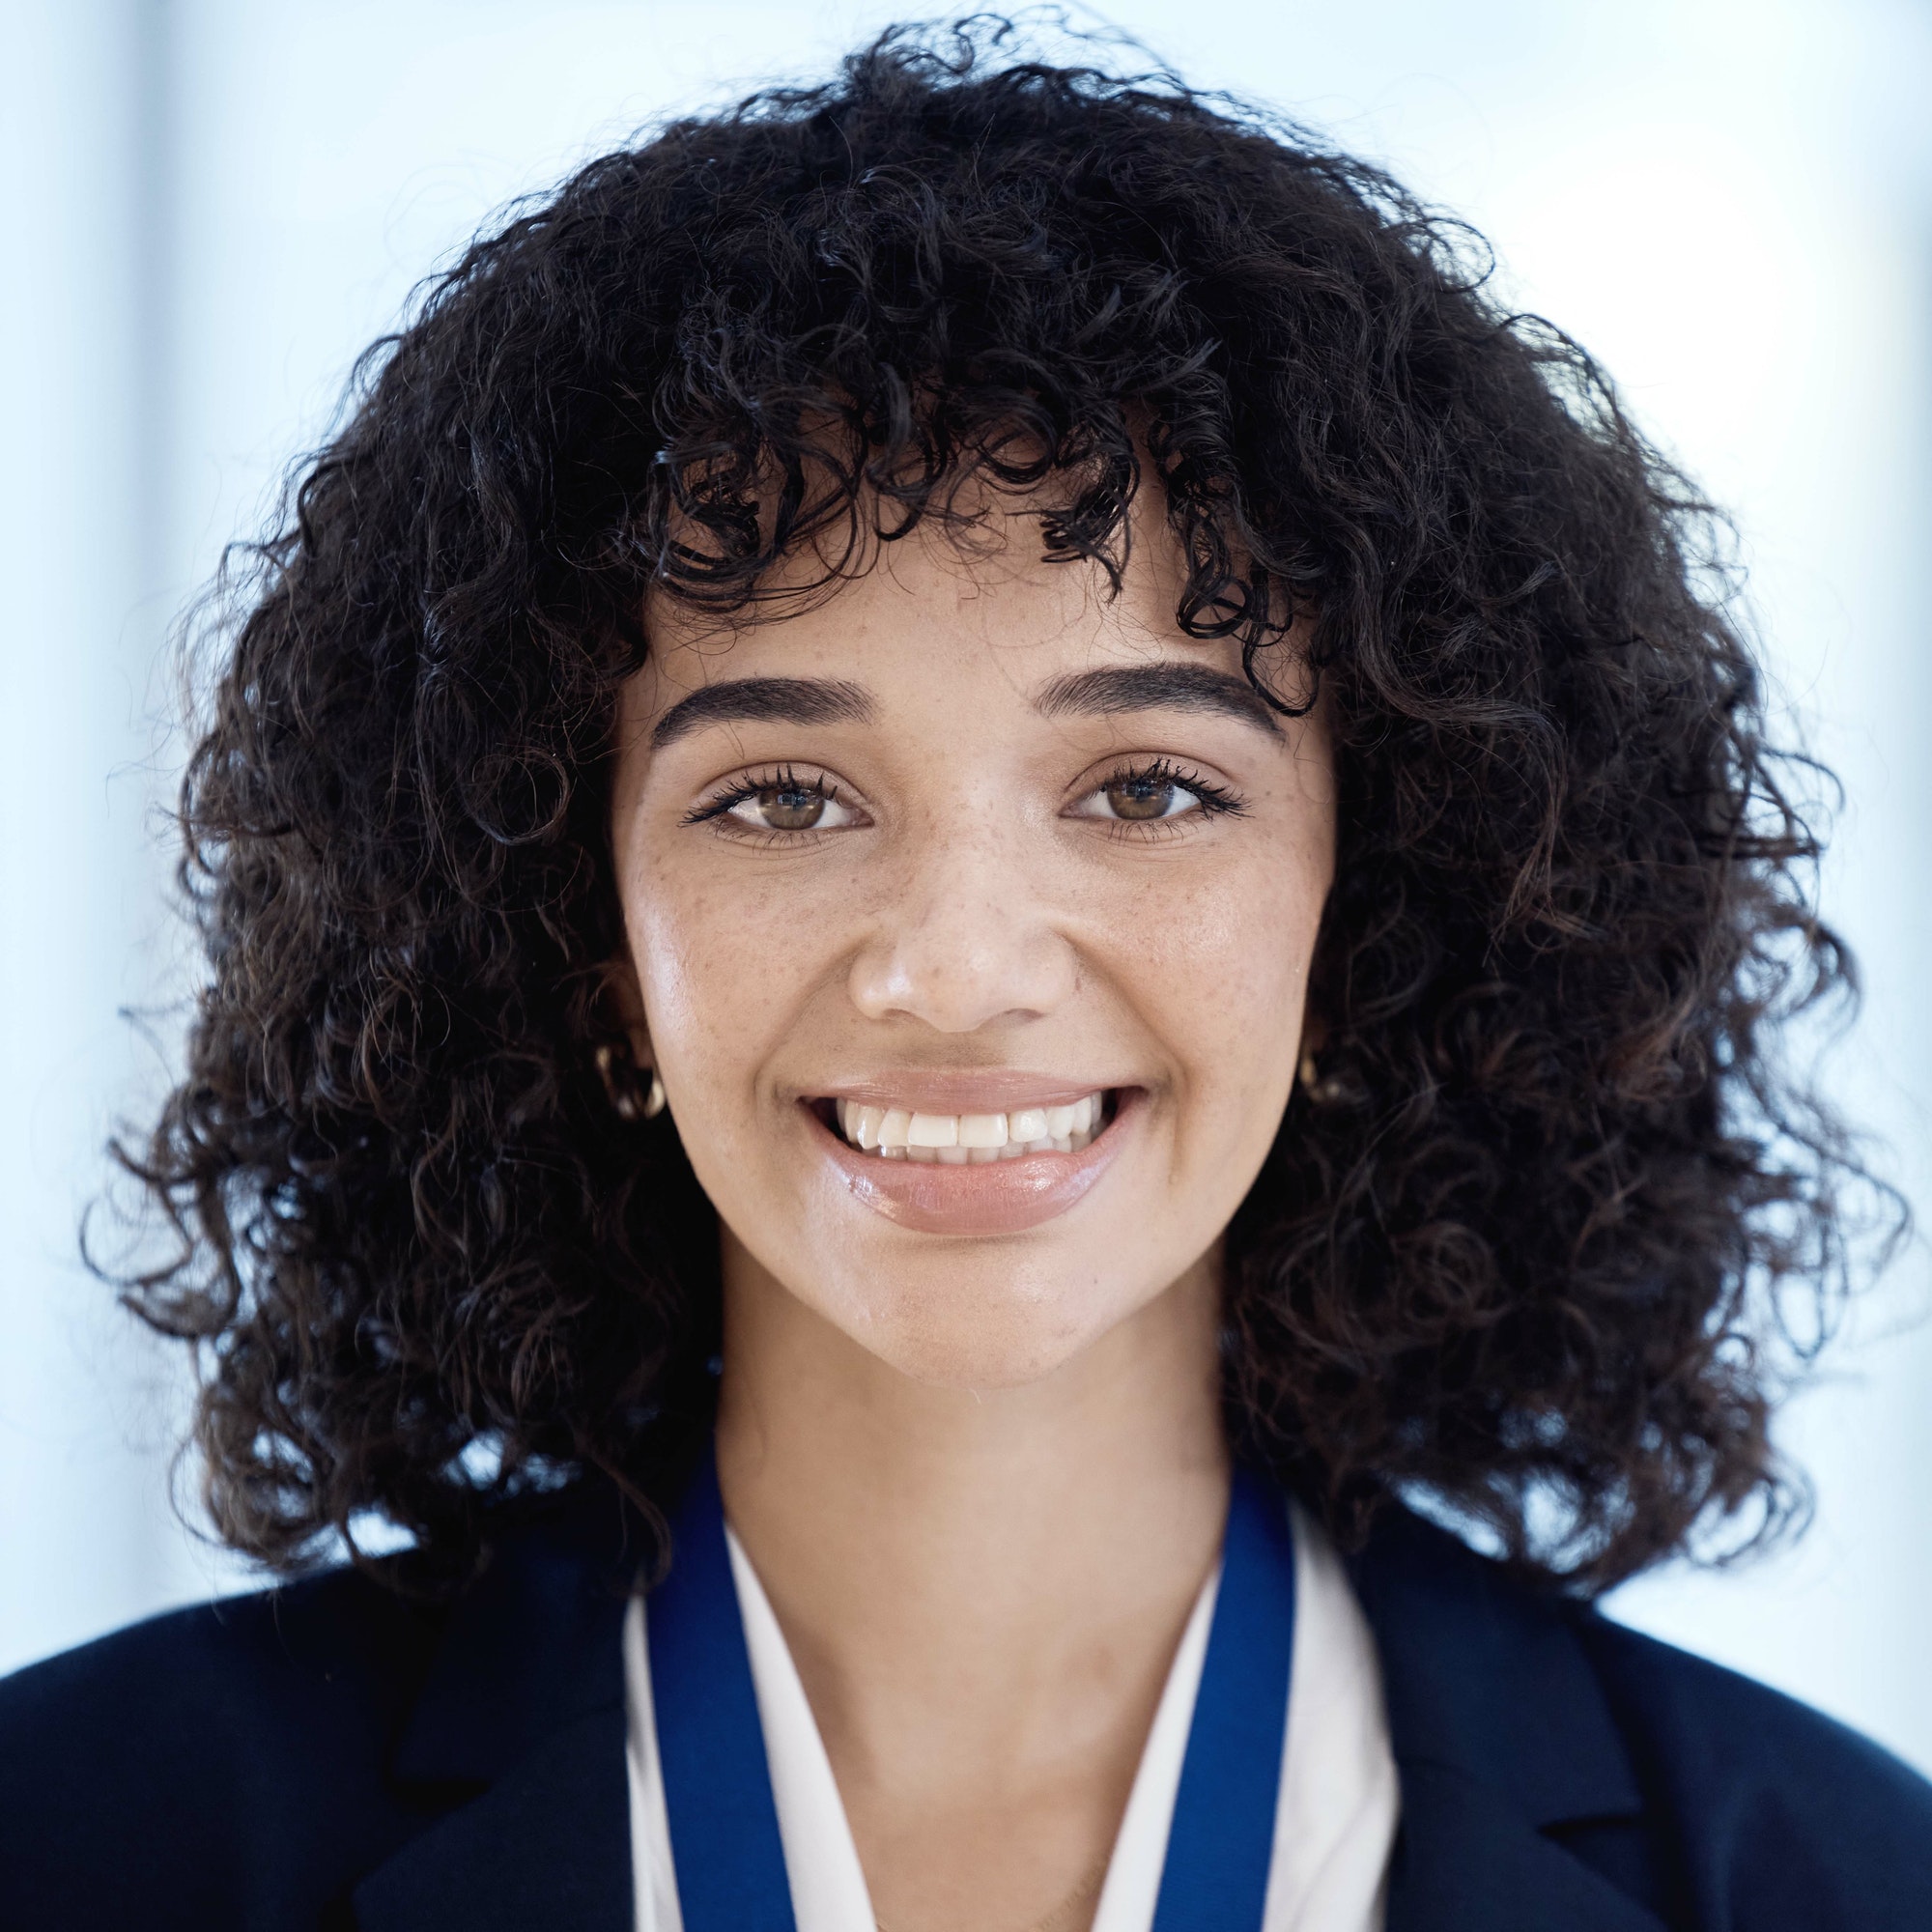 Business woman, portrait and happy with success and professional headshot, corporate goals with vis